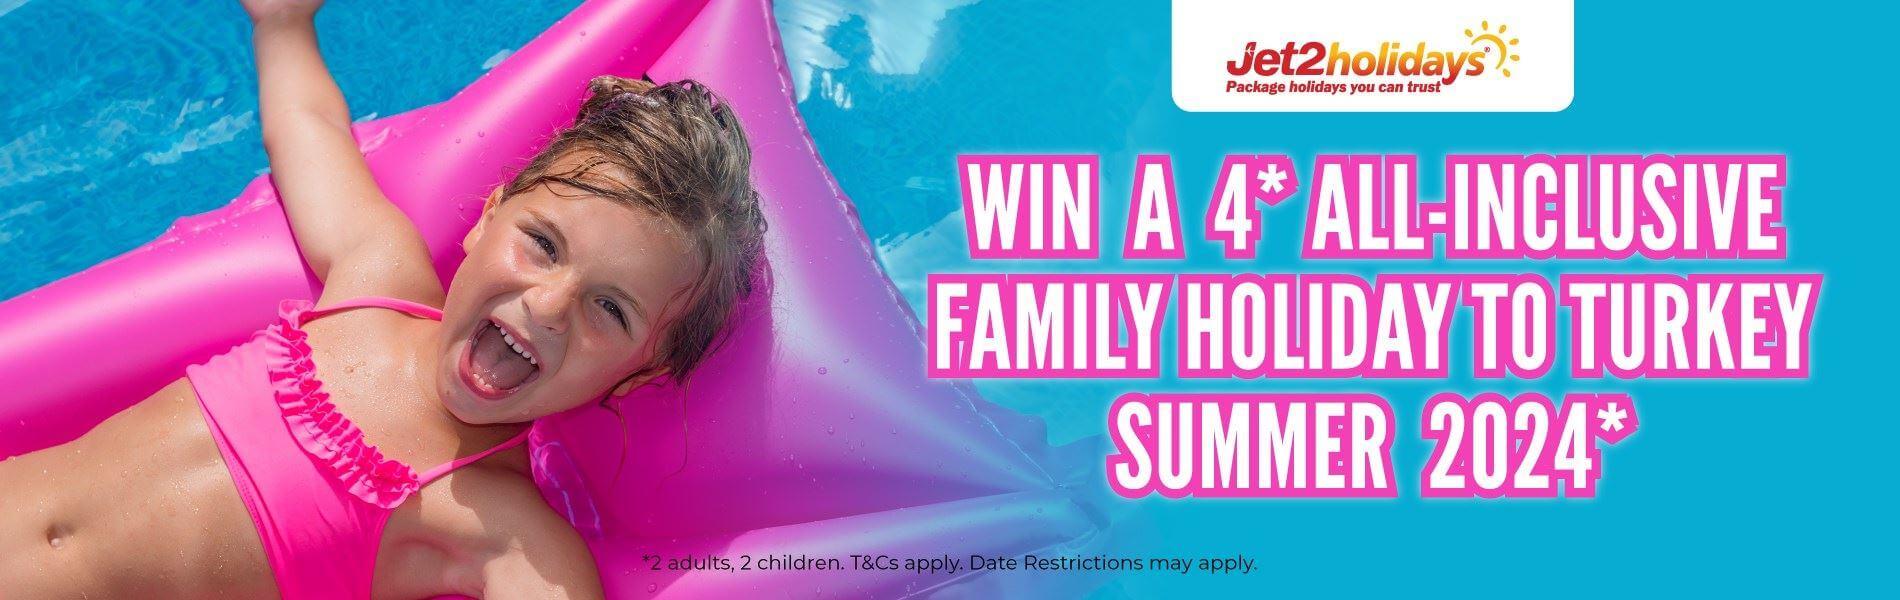 Win an all-inclusive family holiday to Turkey with Barrhead Travel